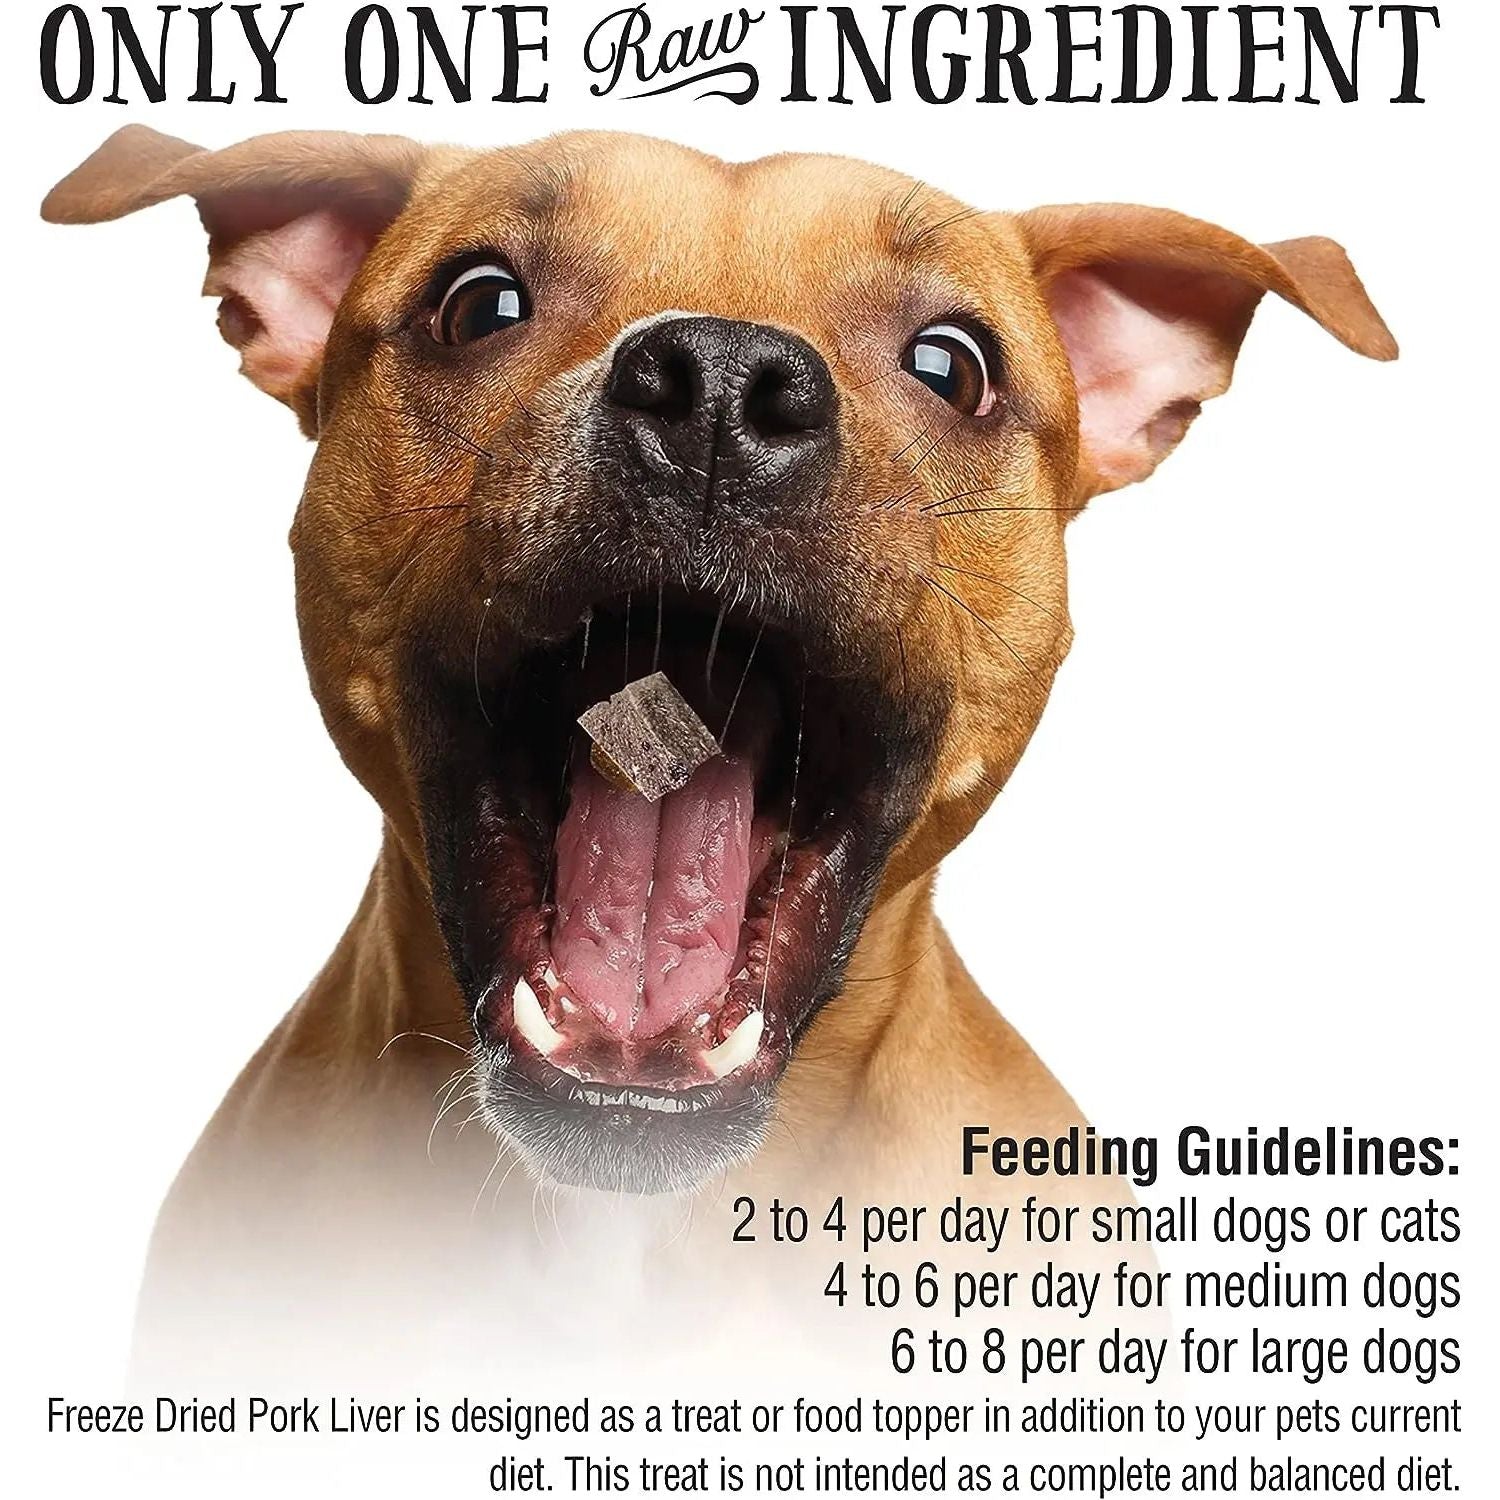 Northwest Naturals Pork Liver Freeze-Dried Treats for Dogs and Cats Northwest Naturals